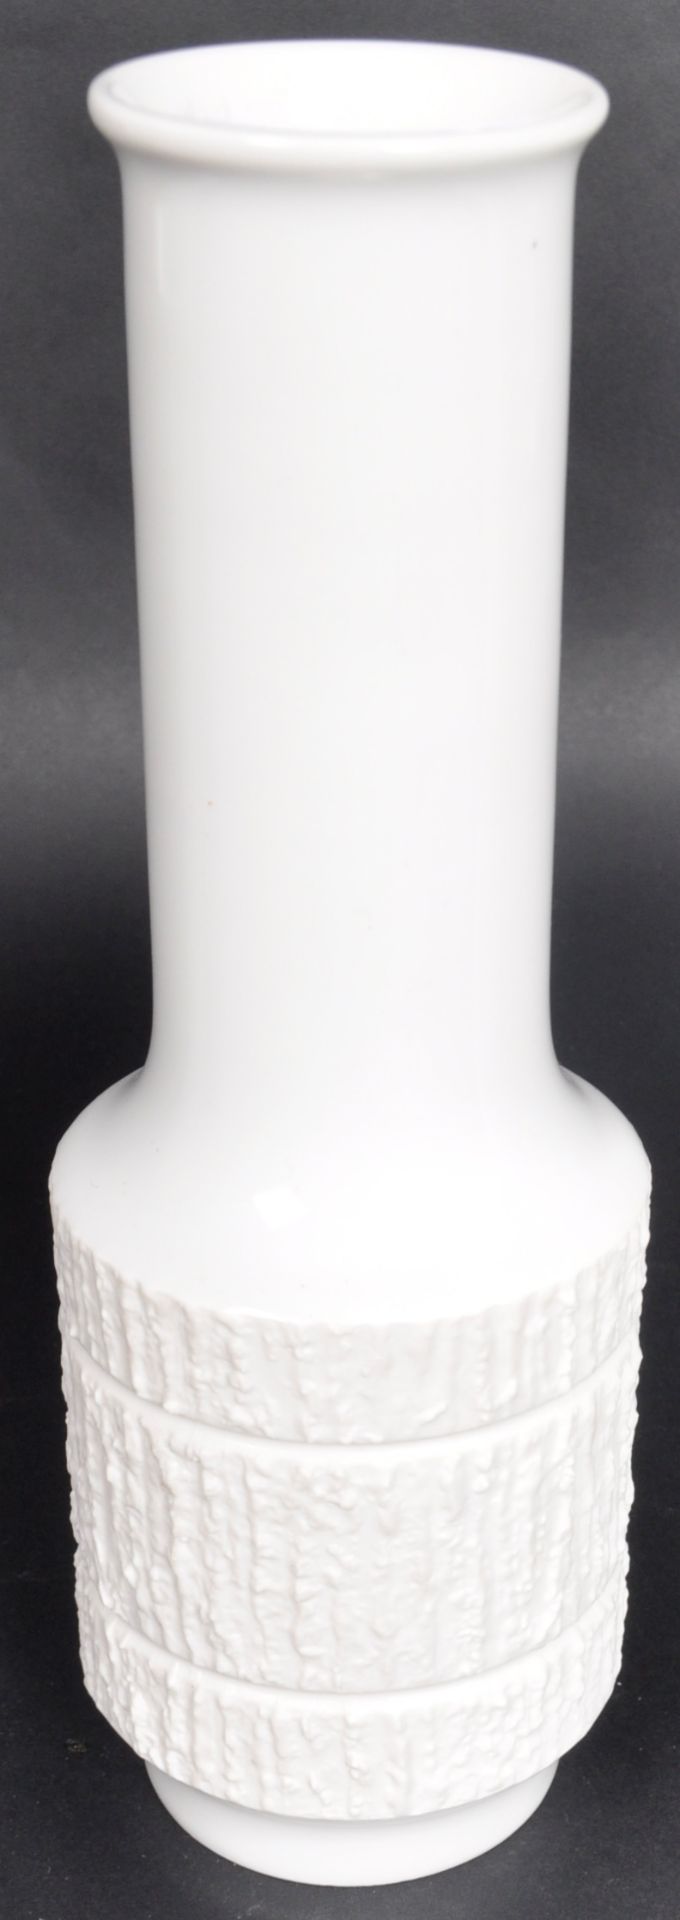 COLLECTION OF MID 20TH CENTURY GERMAN WHITE PORCELAIN VASES - Image 6 of 7